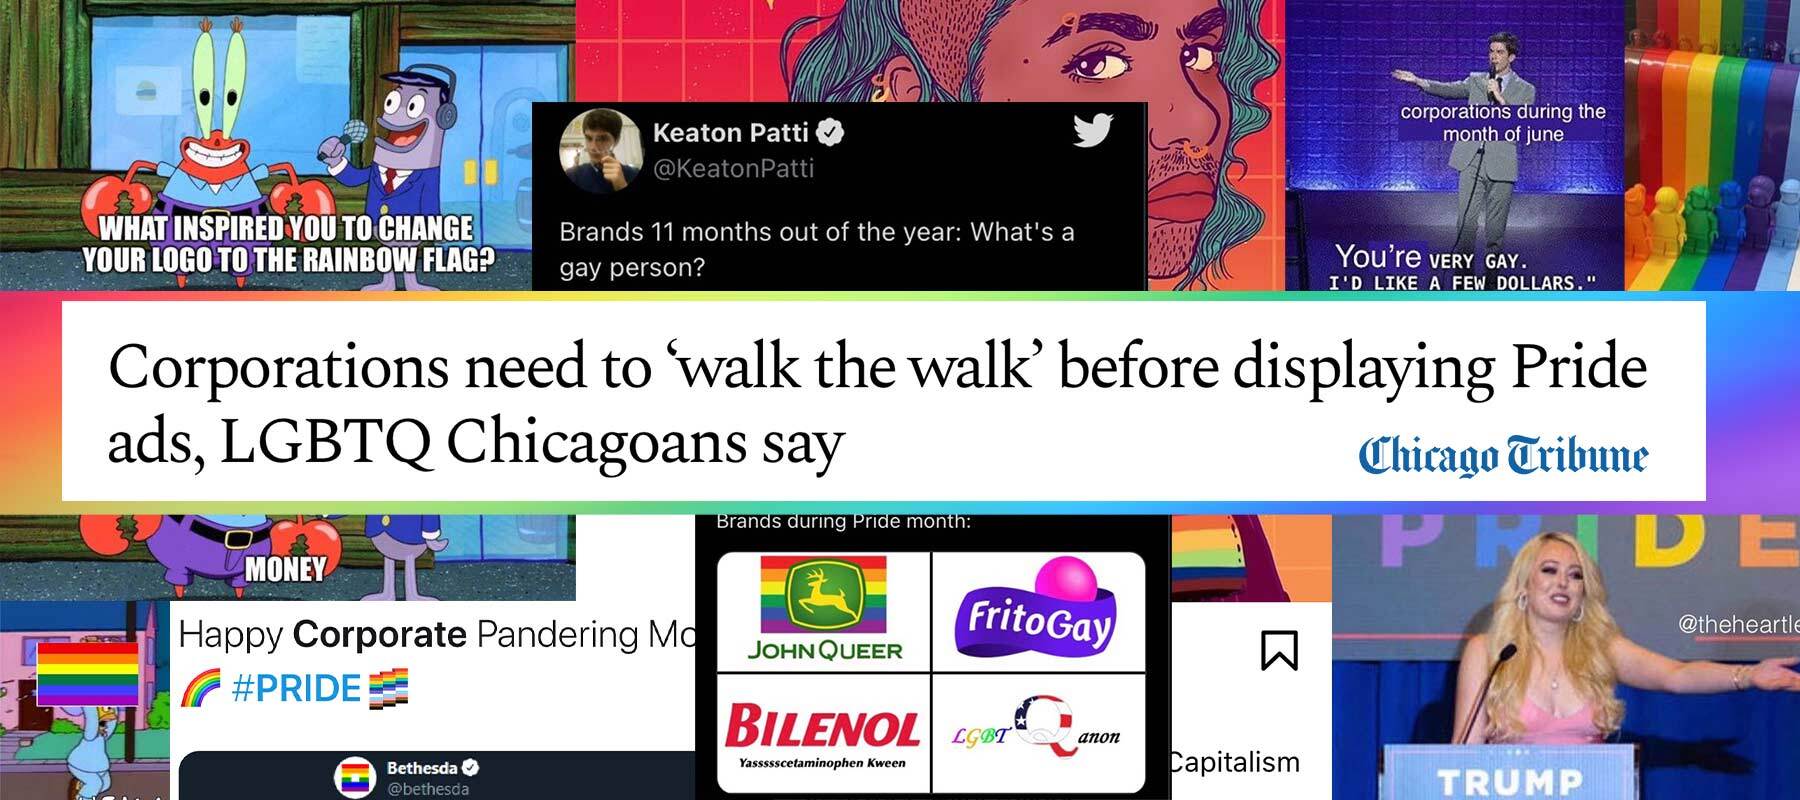 Your Pride Campaign Was… Well, Not So Good